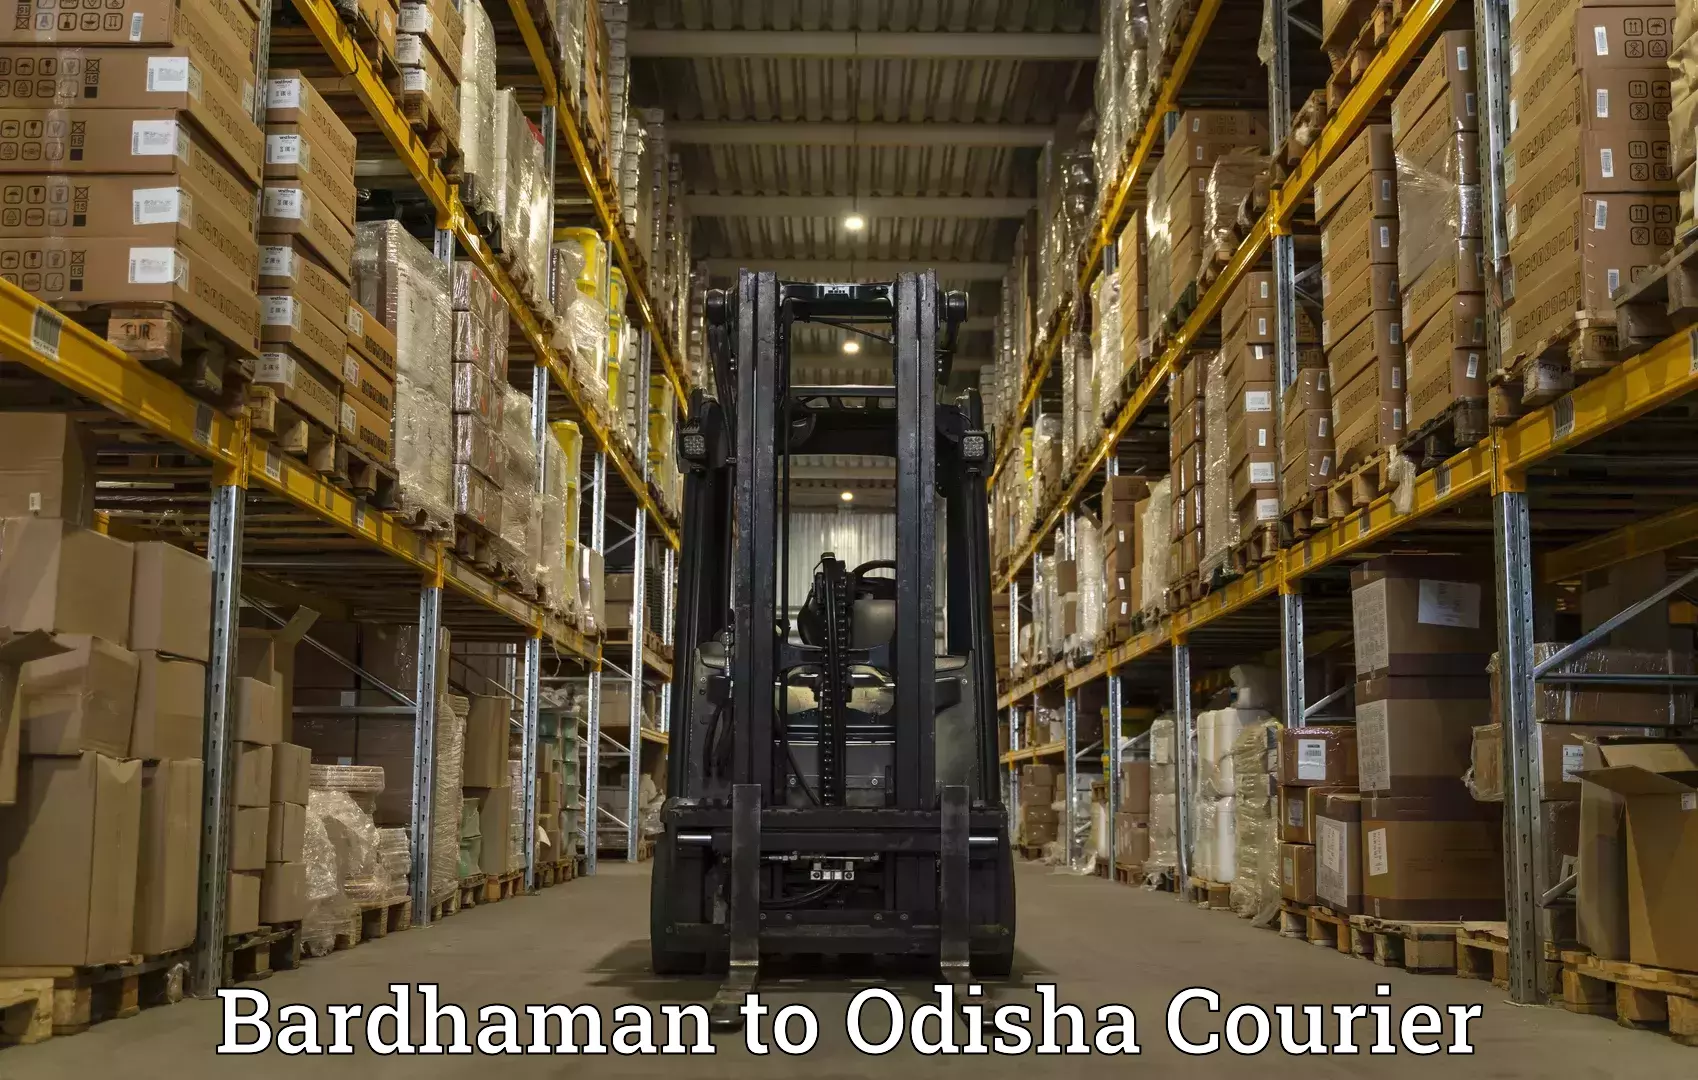 Air courier services Bardhaman to Paradip Port